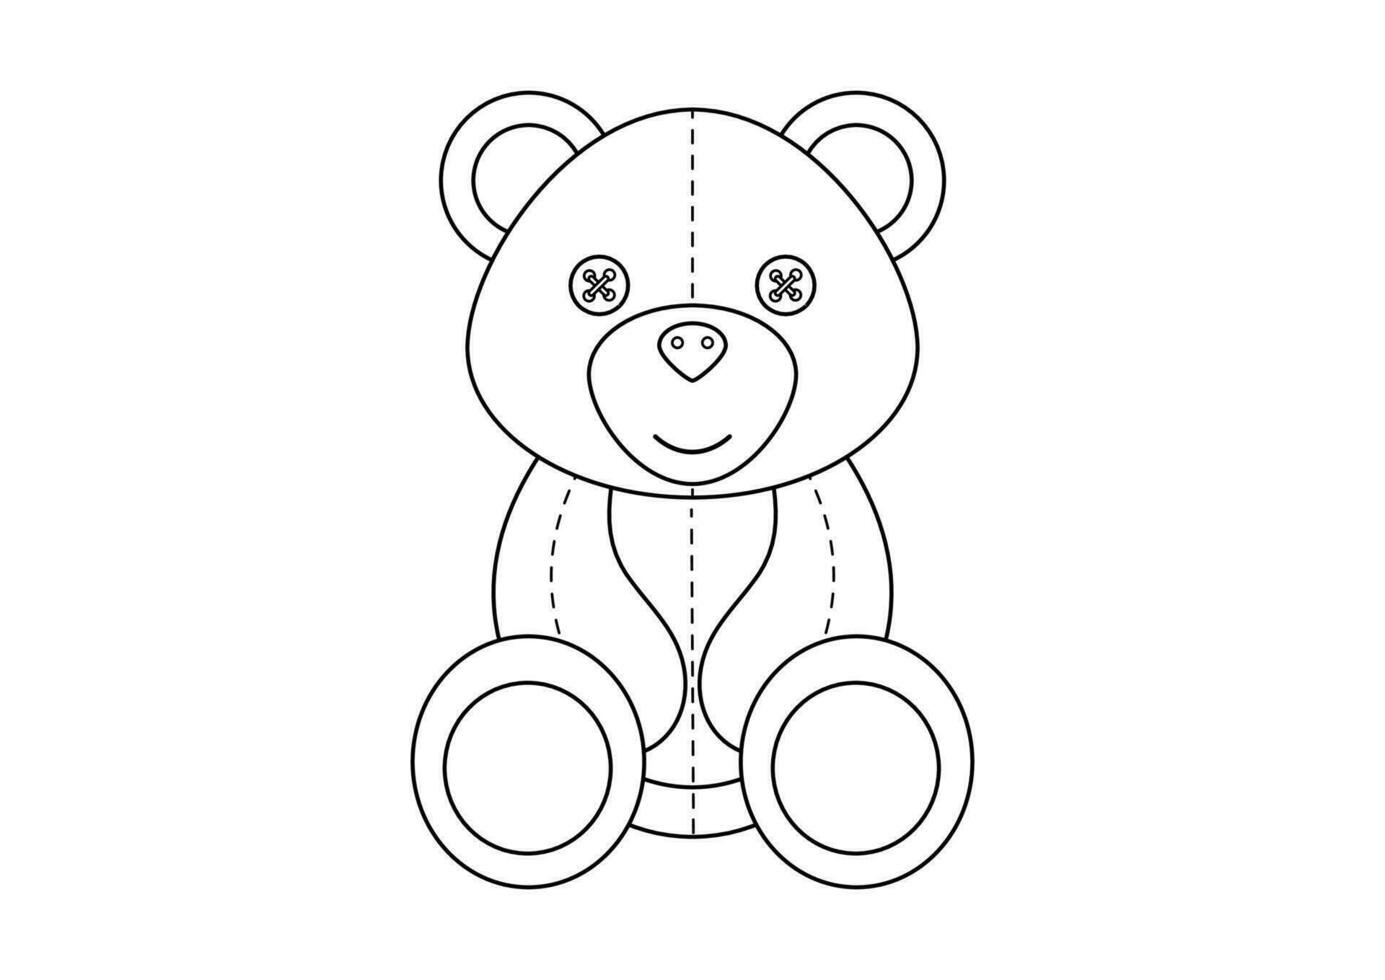 Coloring Page of a Teddy Bear Toy Cartoon Character Vector Illustration